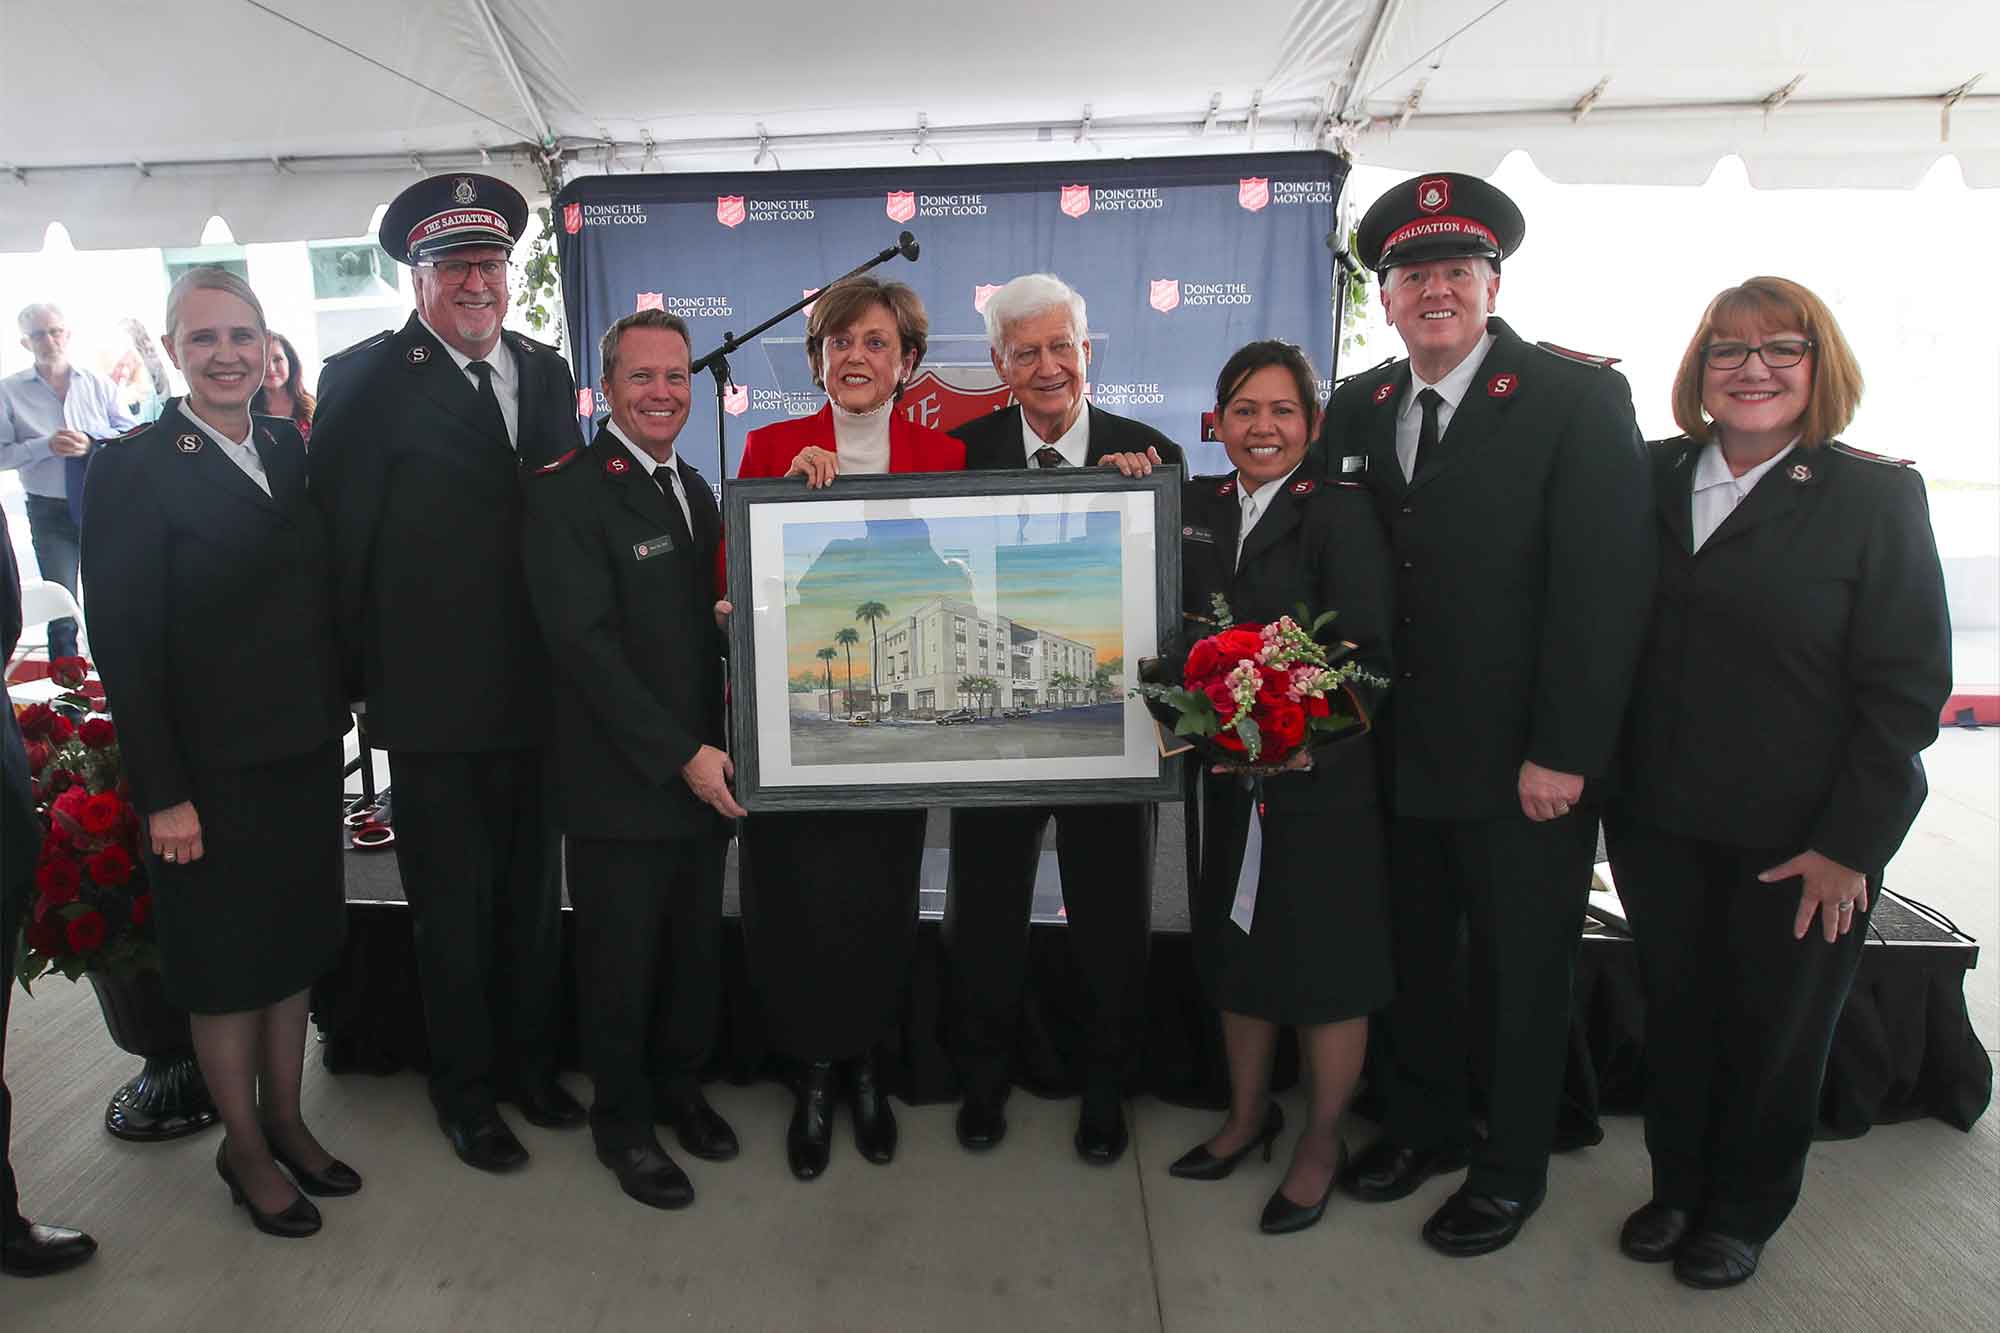 Salvation Army Hope Center opens in Pasadena with 65 apartments